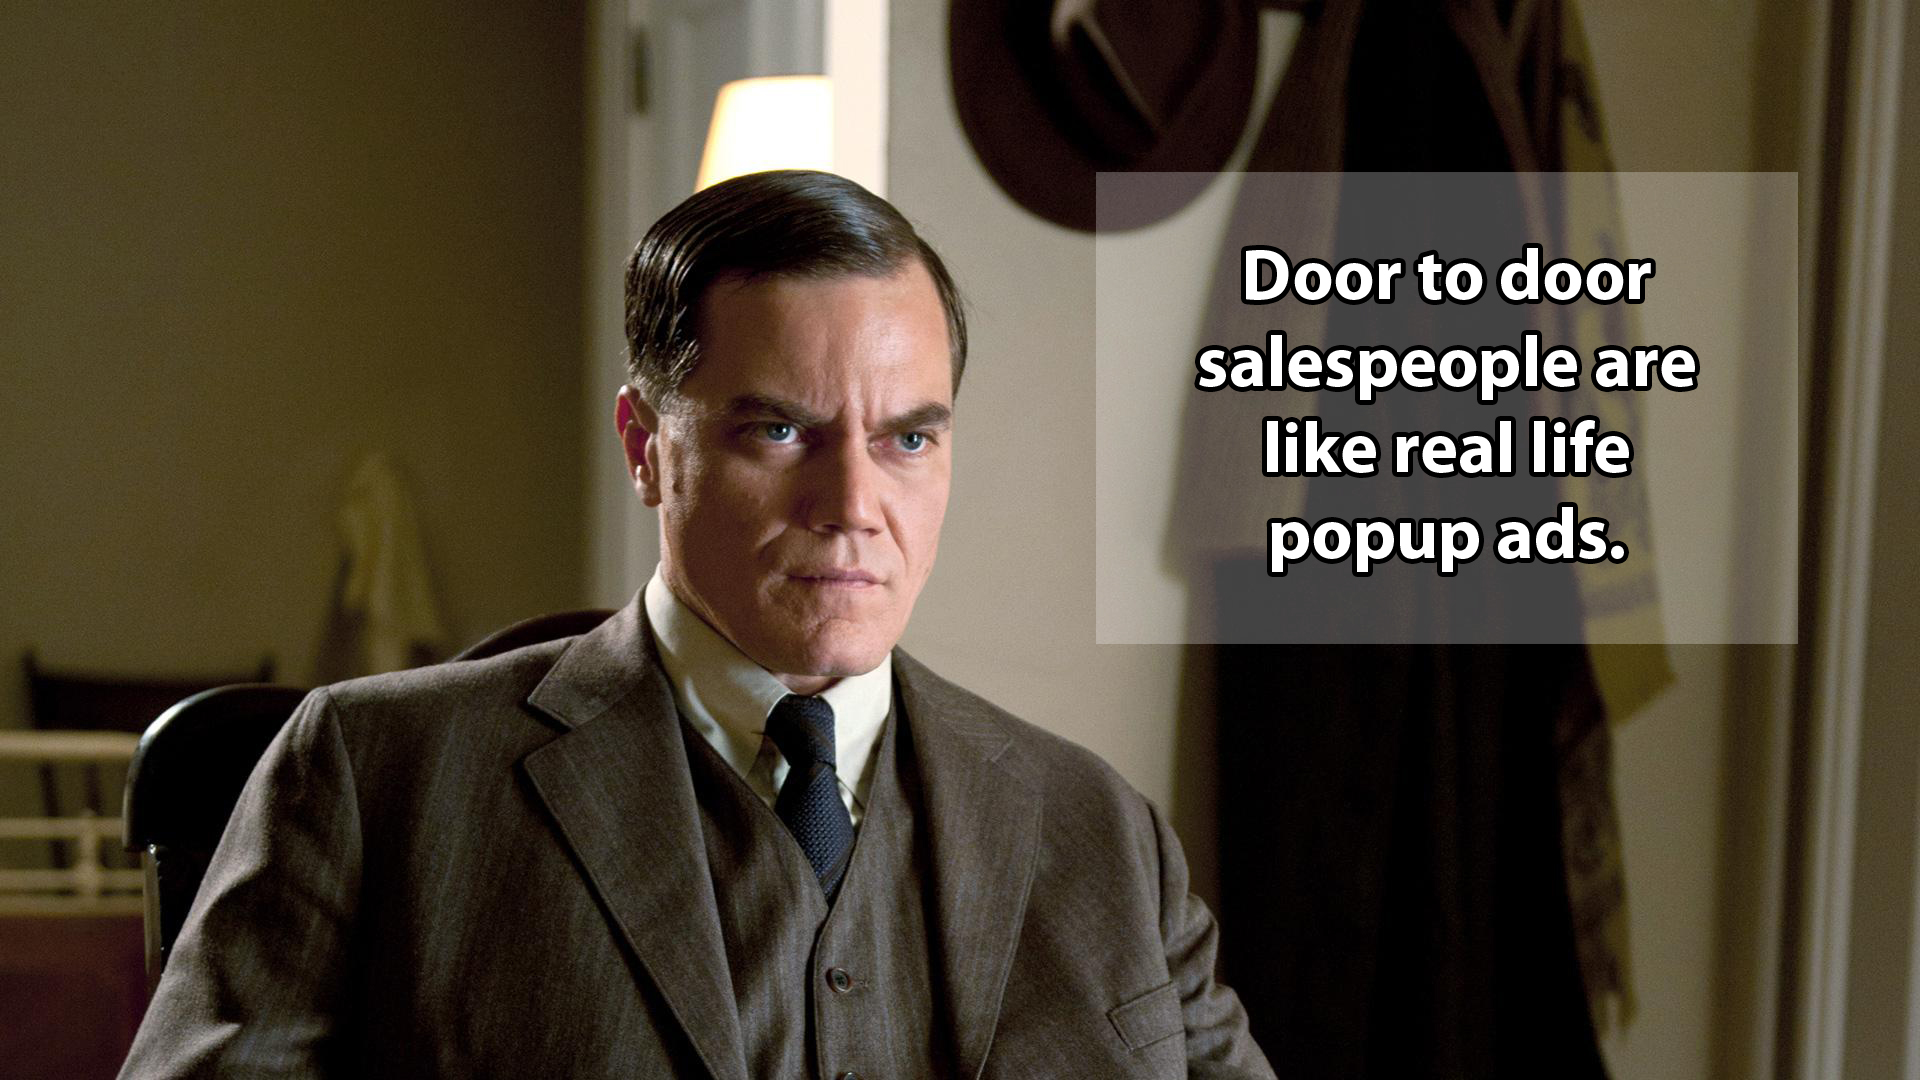 shower thought michael shannon boardwalk empire - Door to door salespeople are real life popup ads.